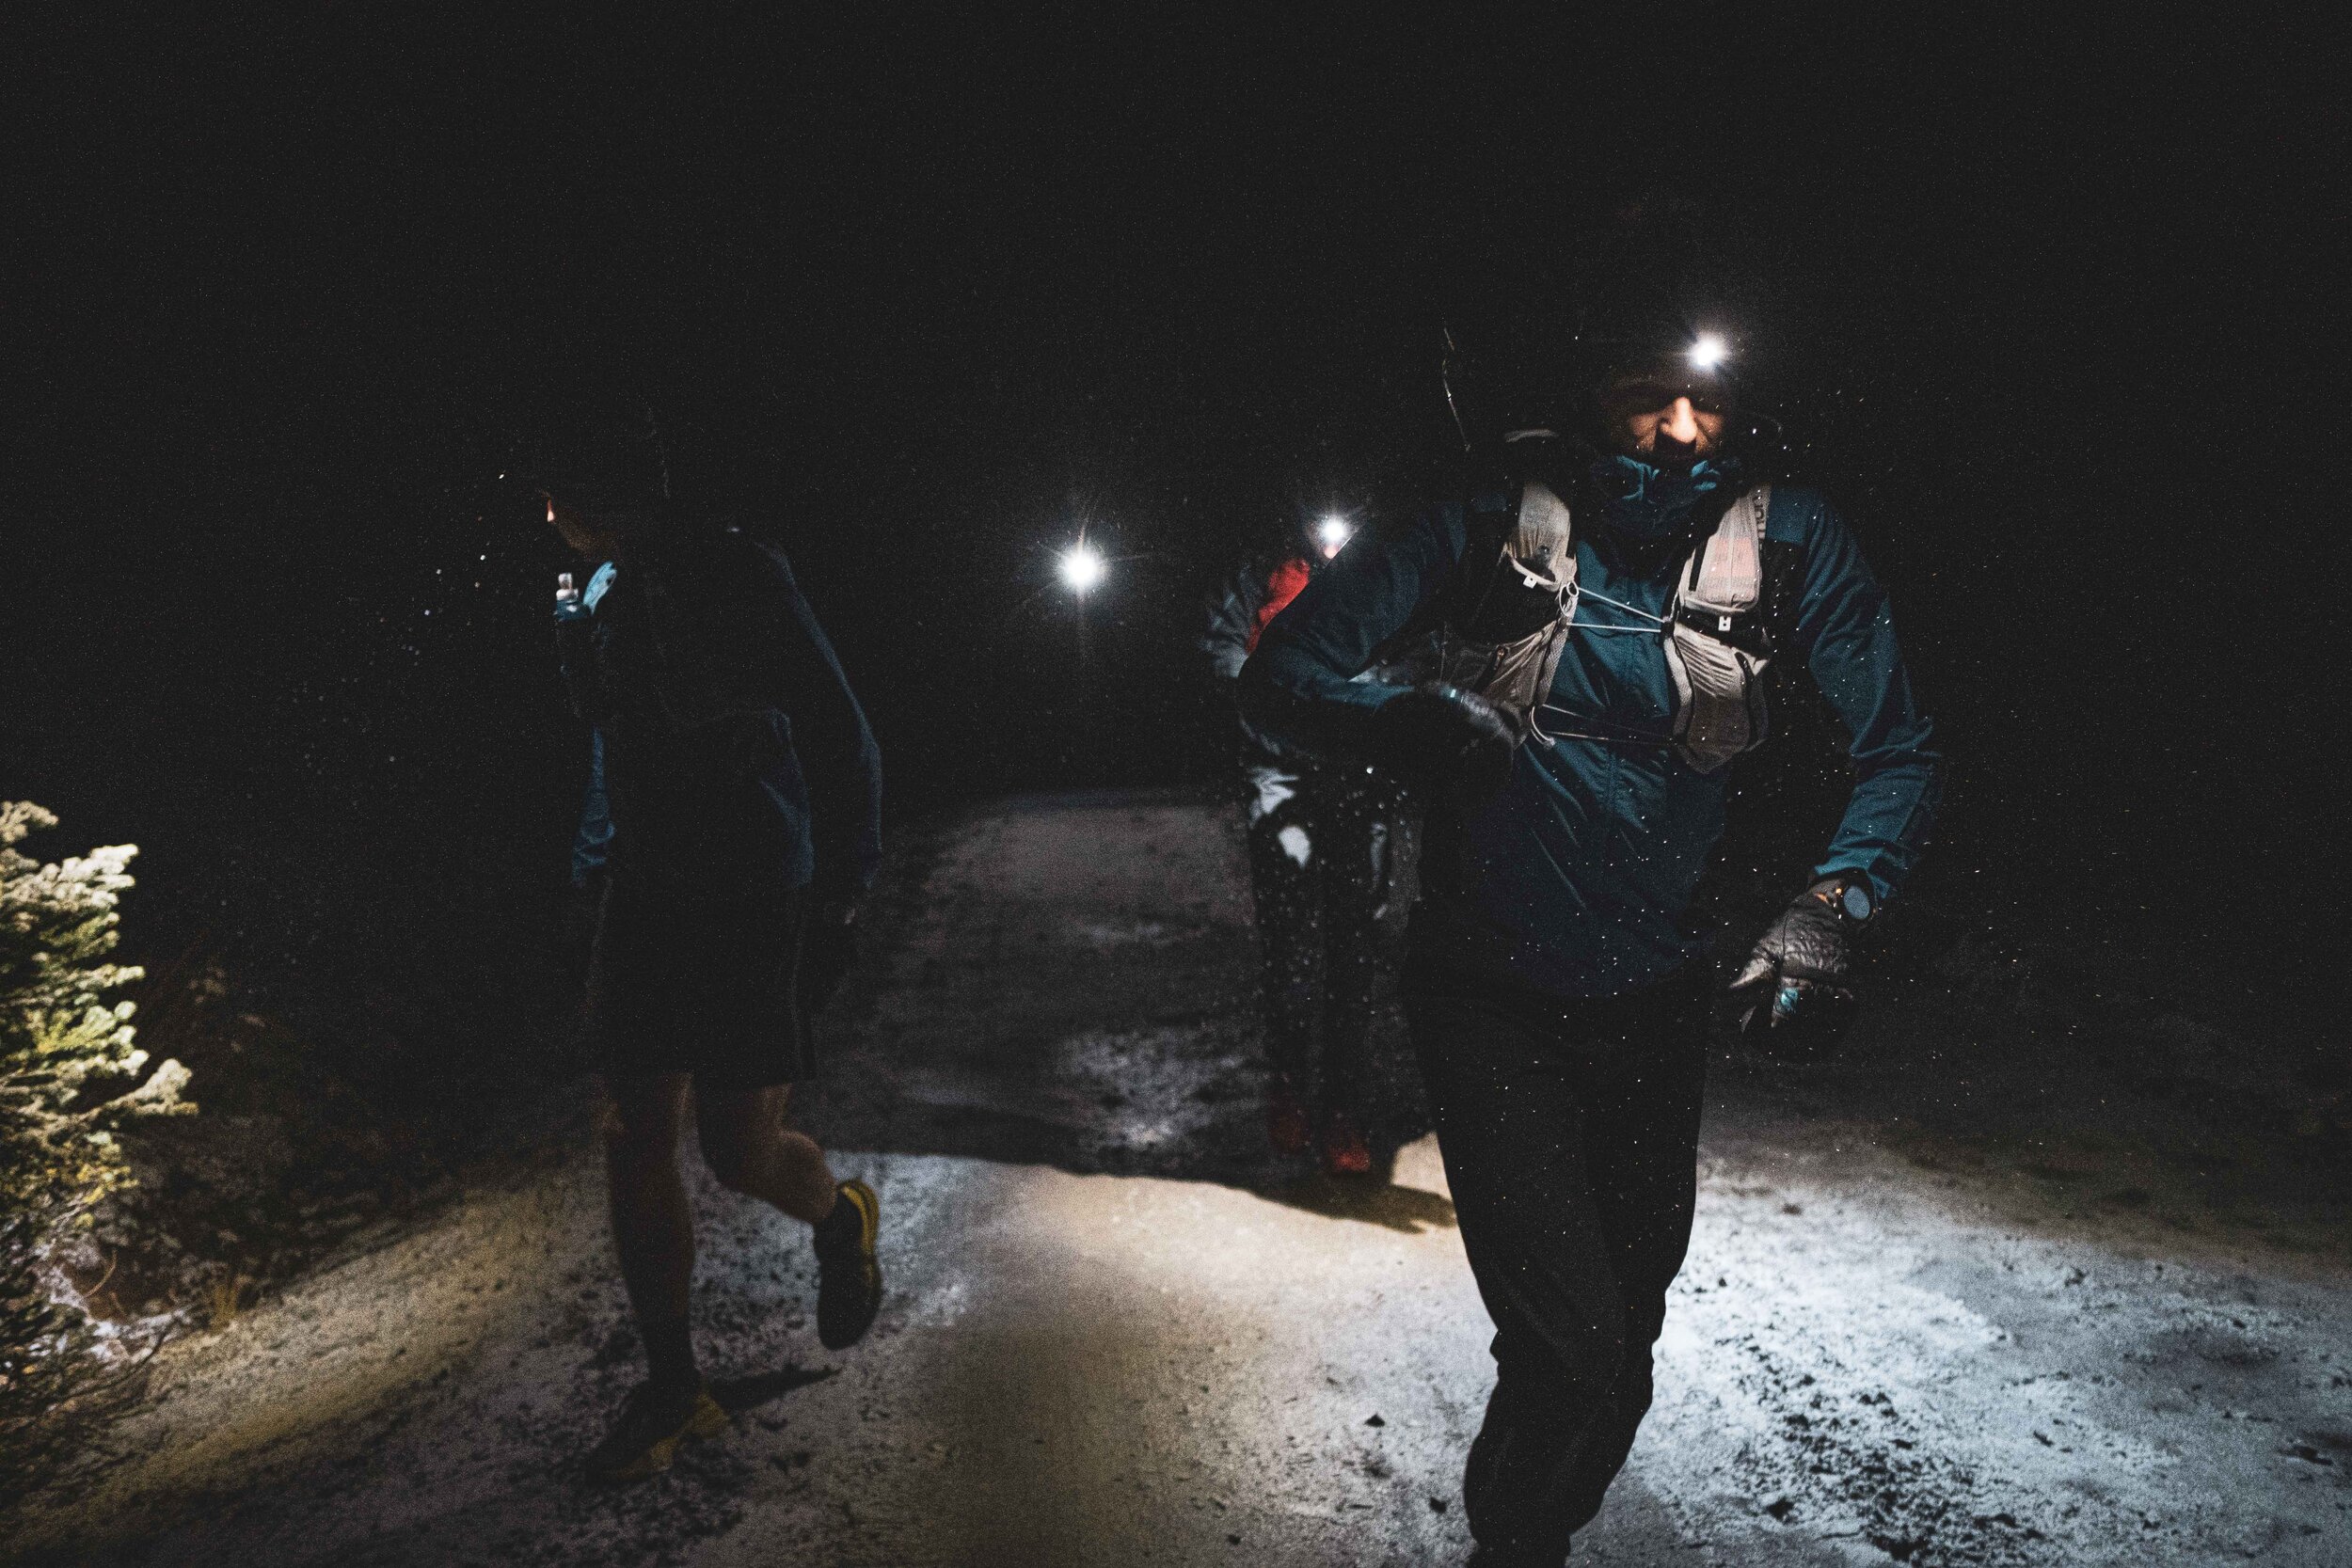  Francois D’Haene and his pacers embark on the second leg of his FKT attempt on Washington’s PCT segment.  